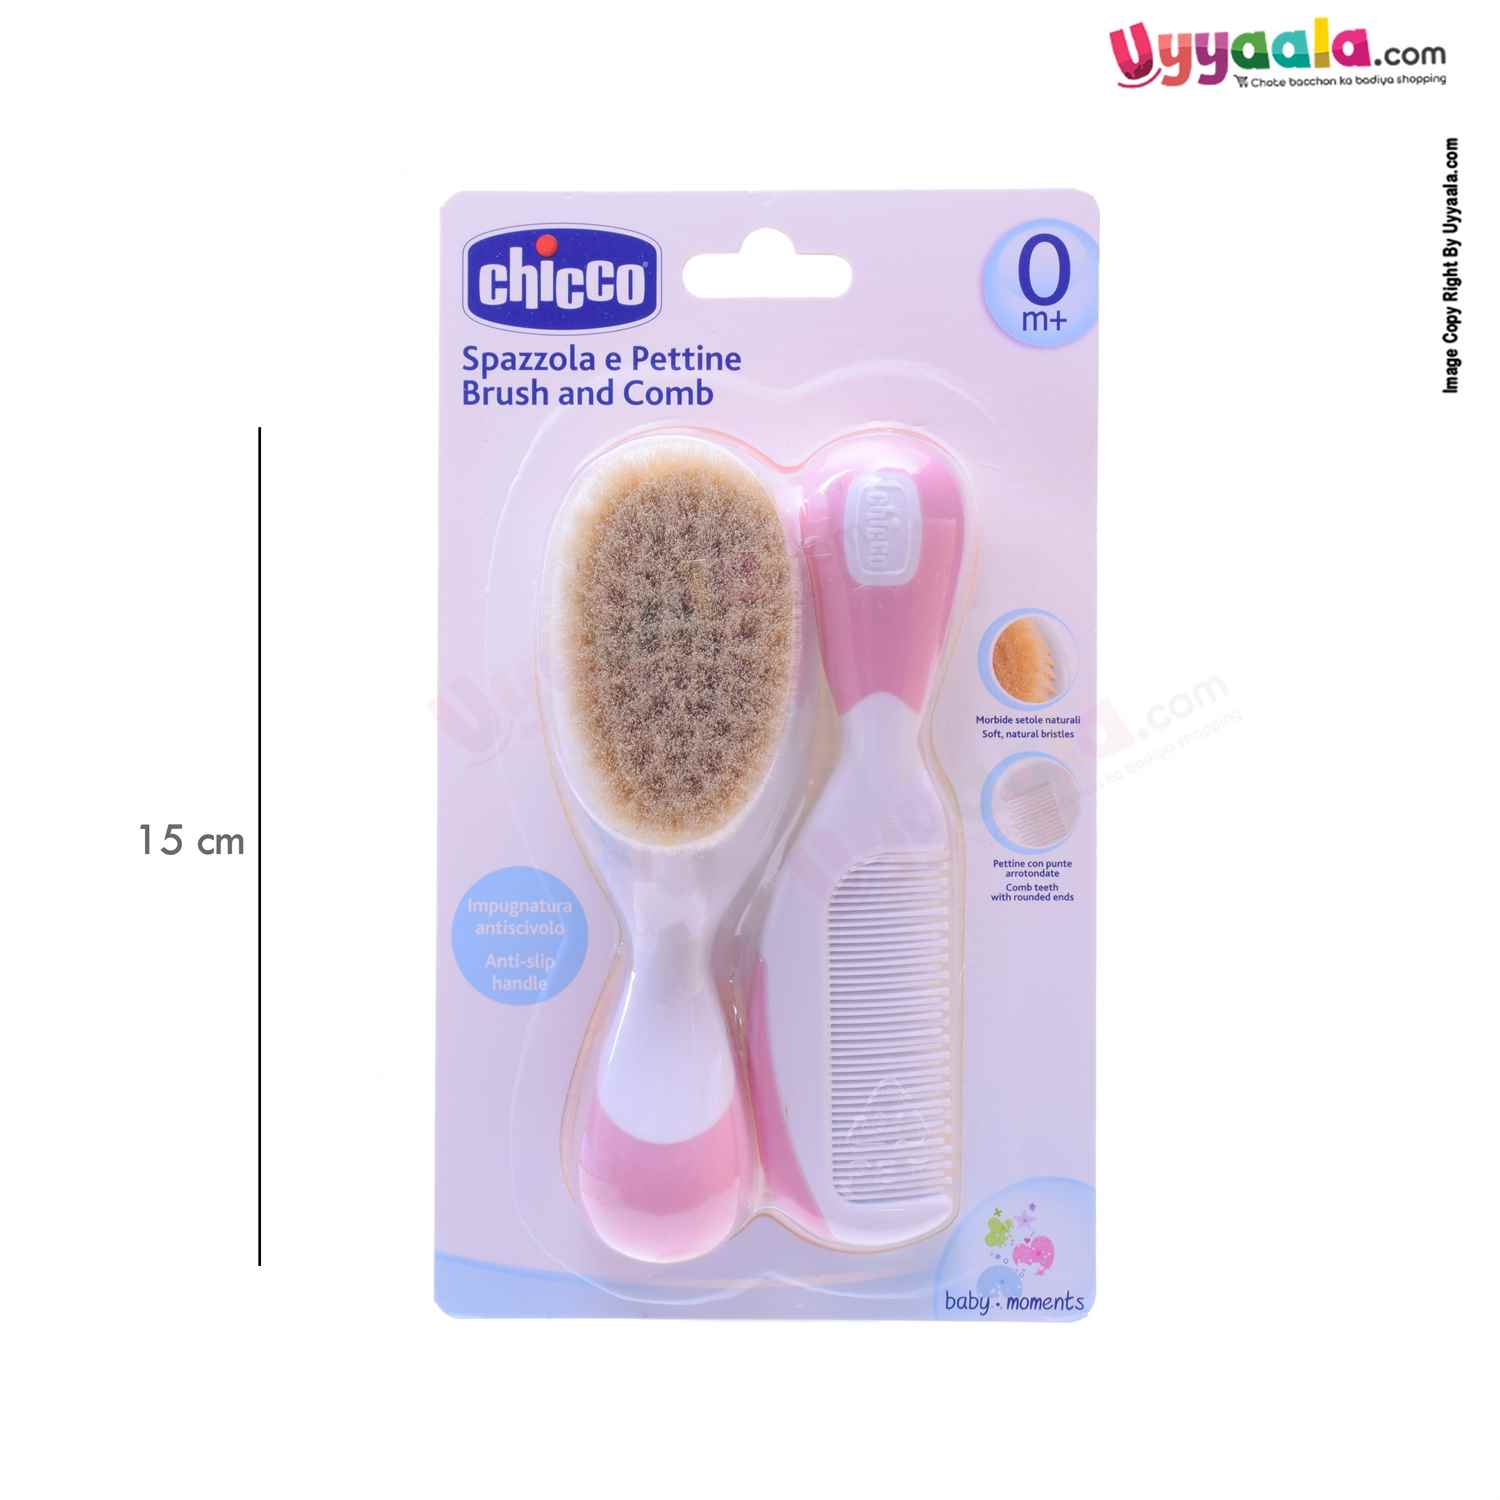 Brush & comb set for babies, Pink